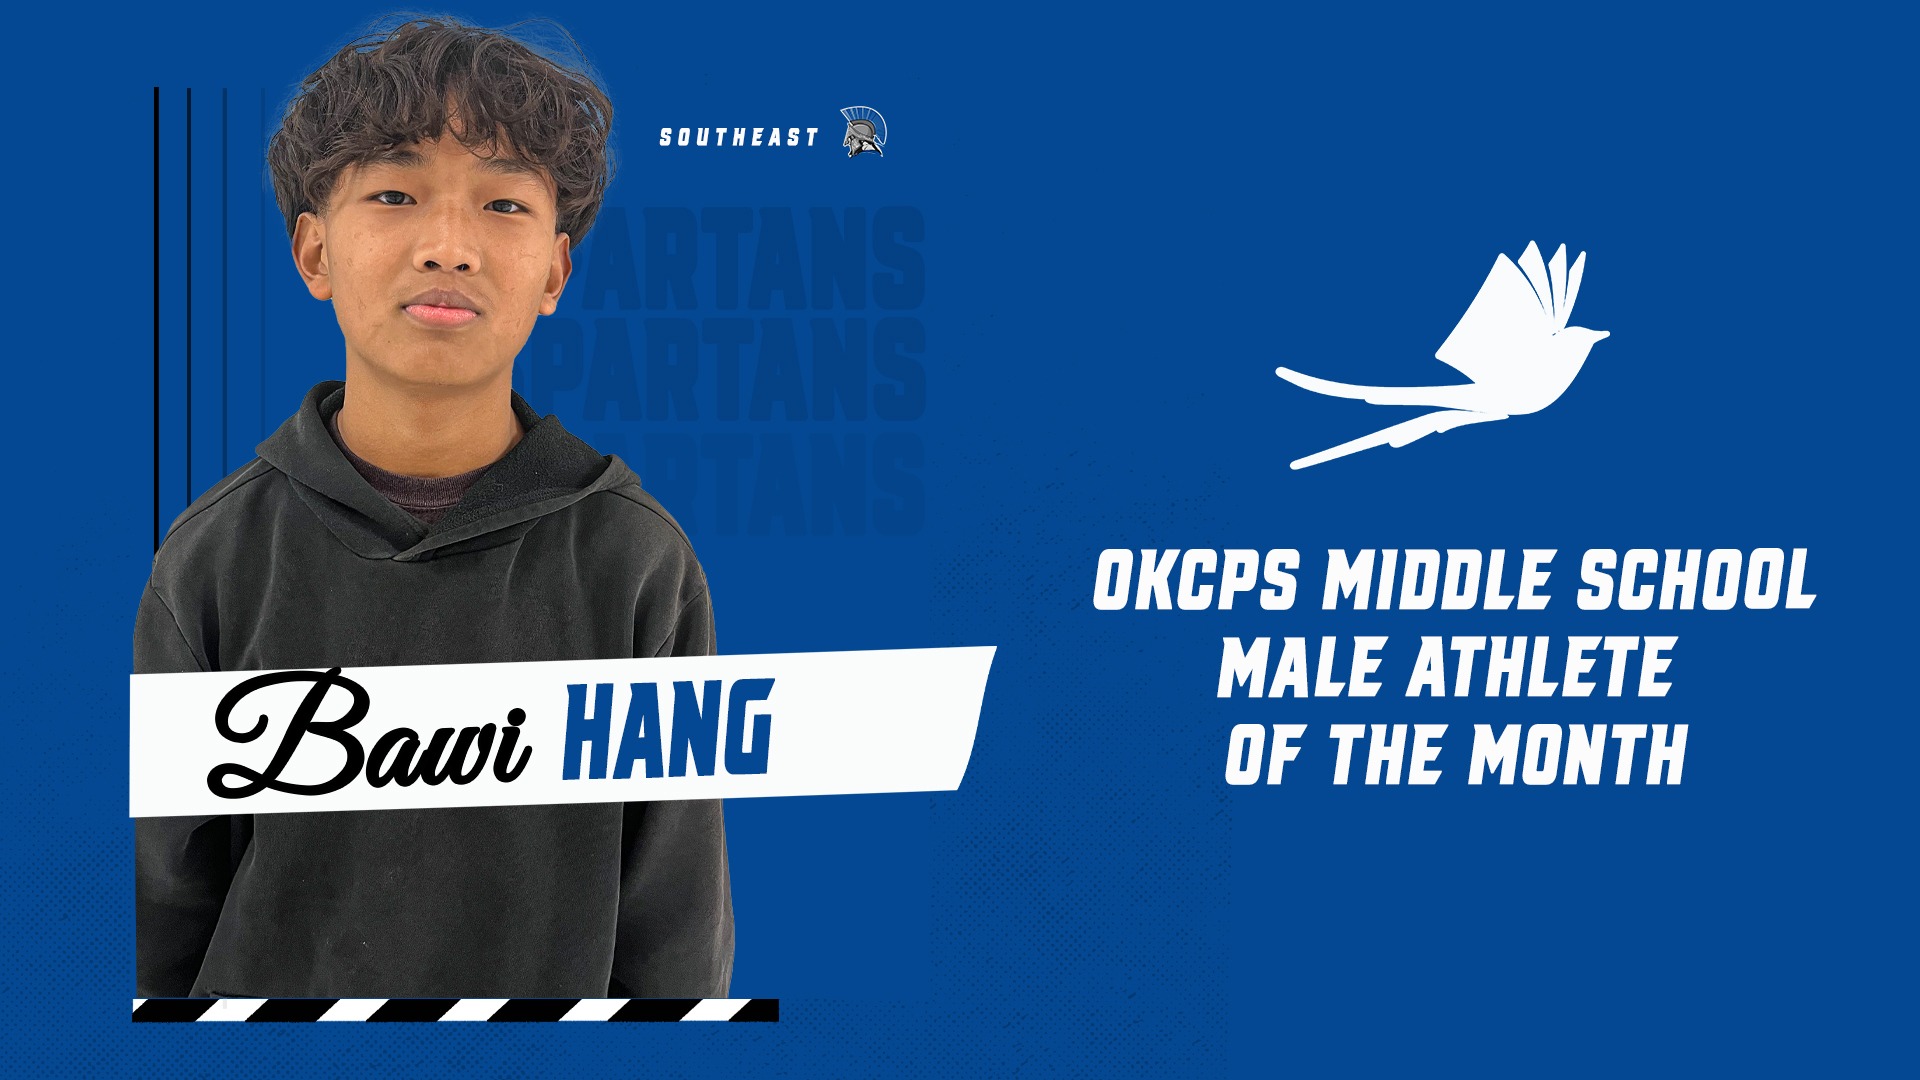 Slide 0 - Bawi Hang Named OKCPS Male Athlete of the Month for January